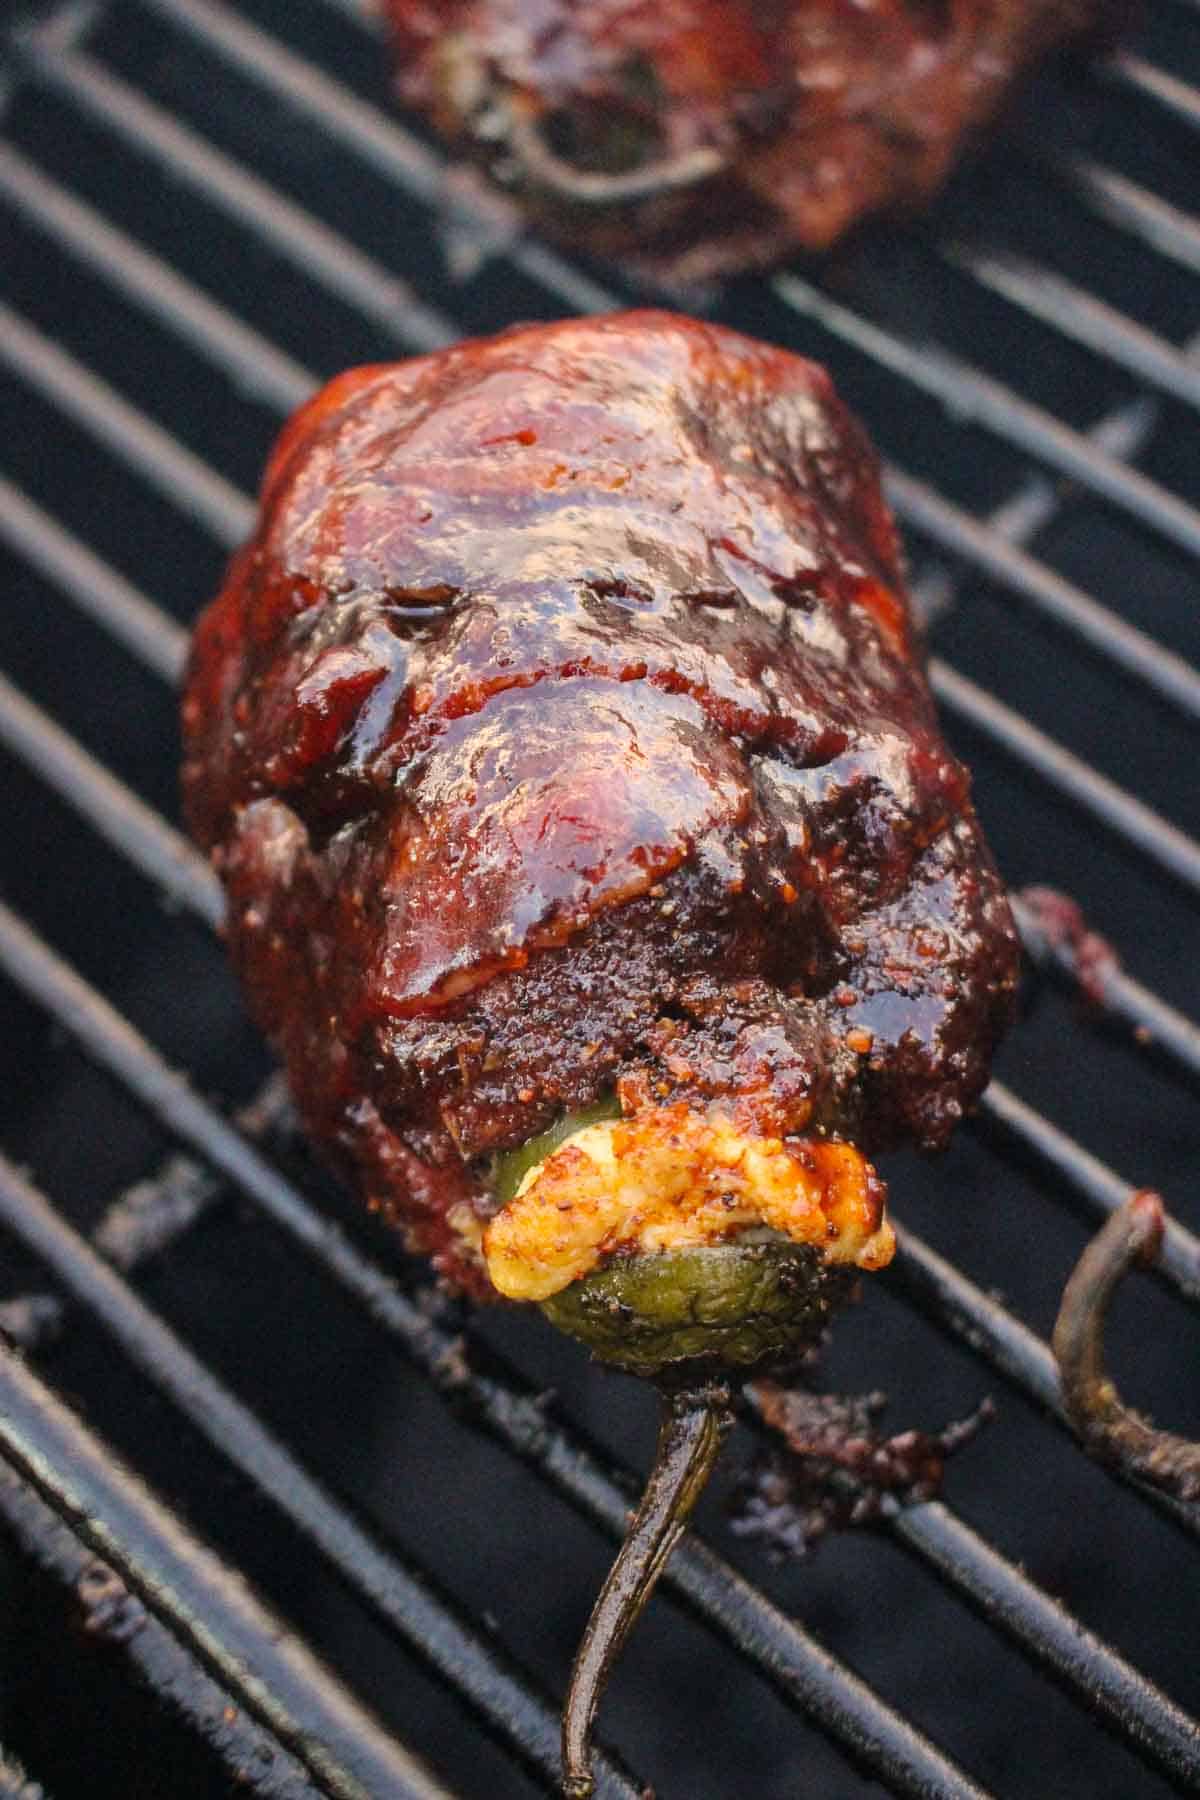 A close up shot of a beef armadillo egg on the smoker.